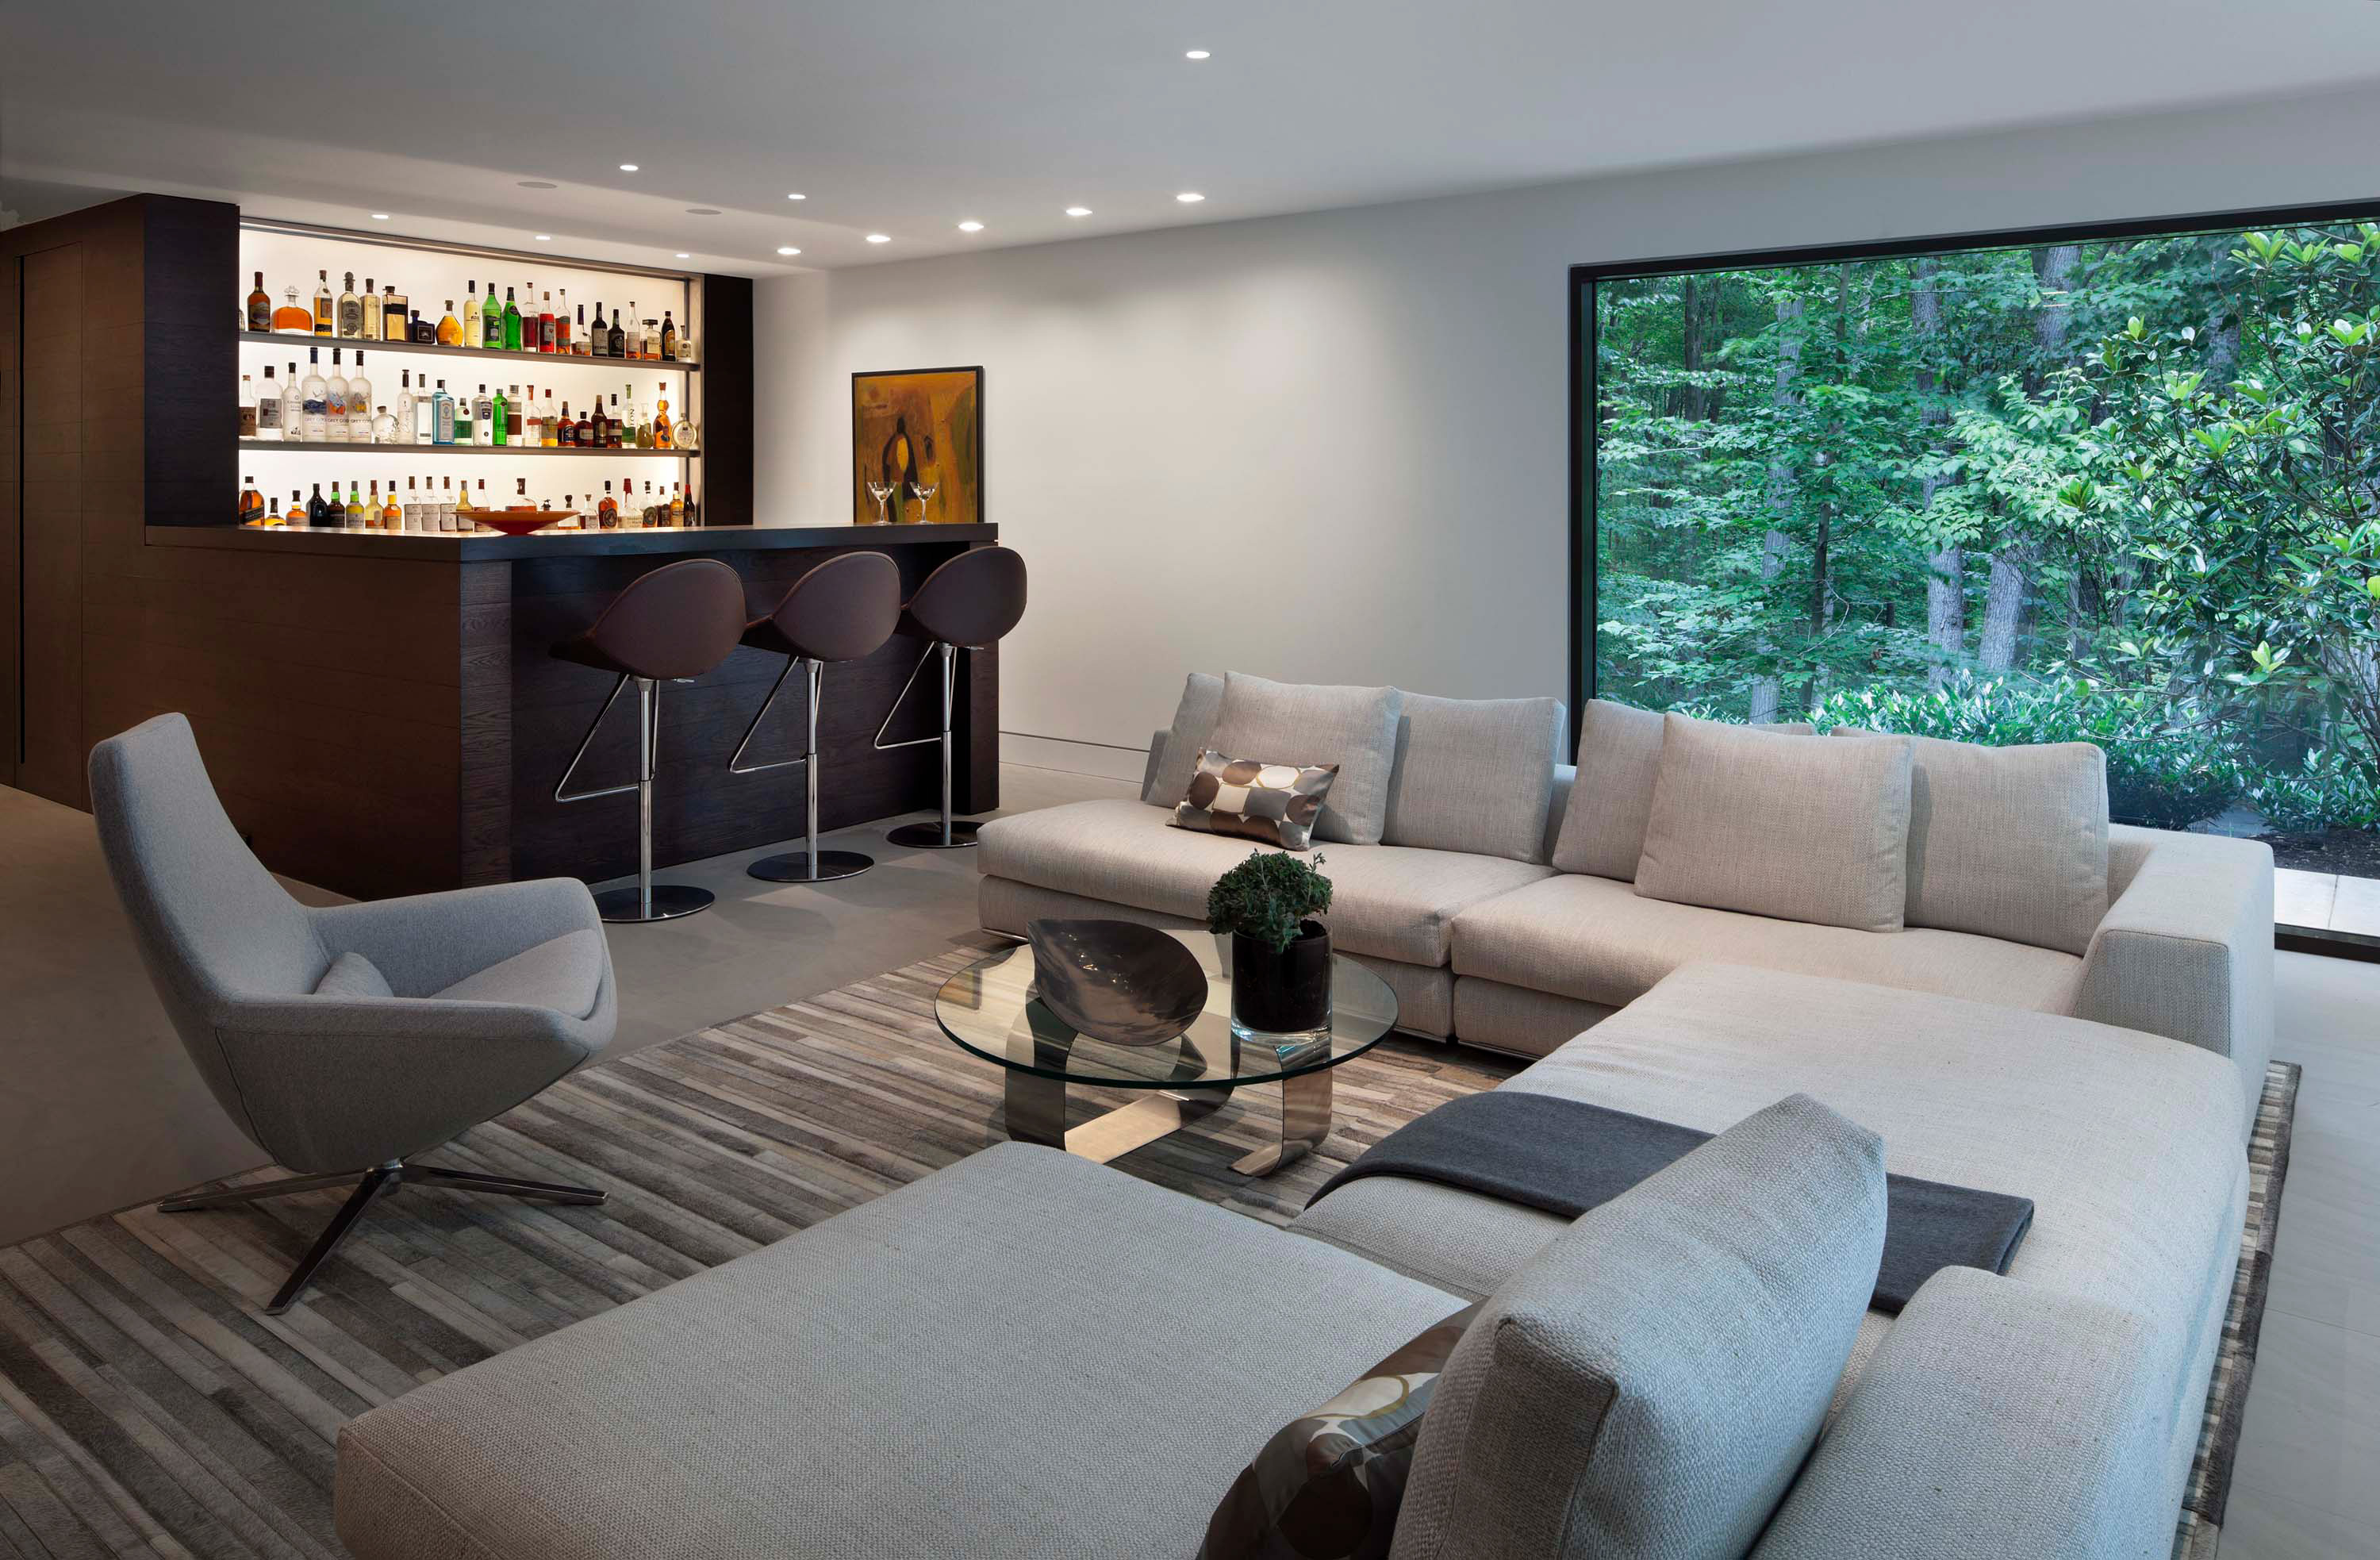 Interior photo of the New Canaan Residence by Specht Novak Architects. Shot by Elizabeth Felicella featuring a mini bar and adjacent lounging area with a large sectional couch, complementing chair, and glass wall.